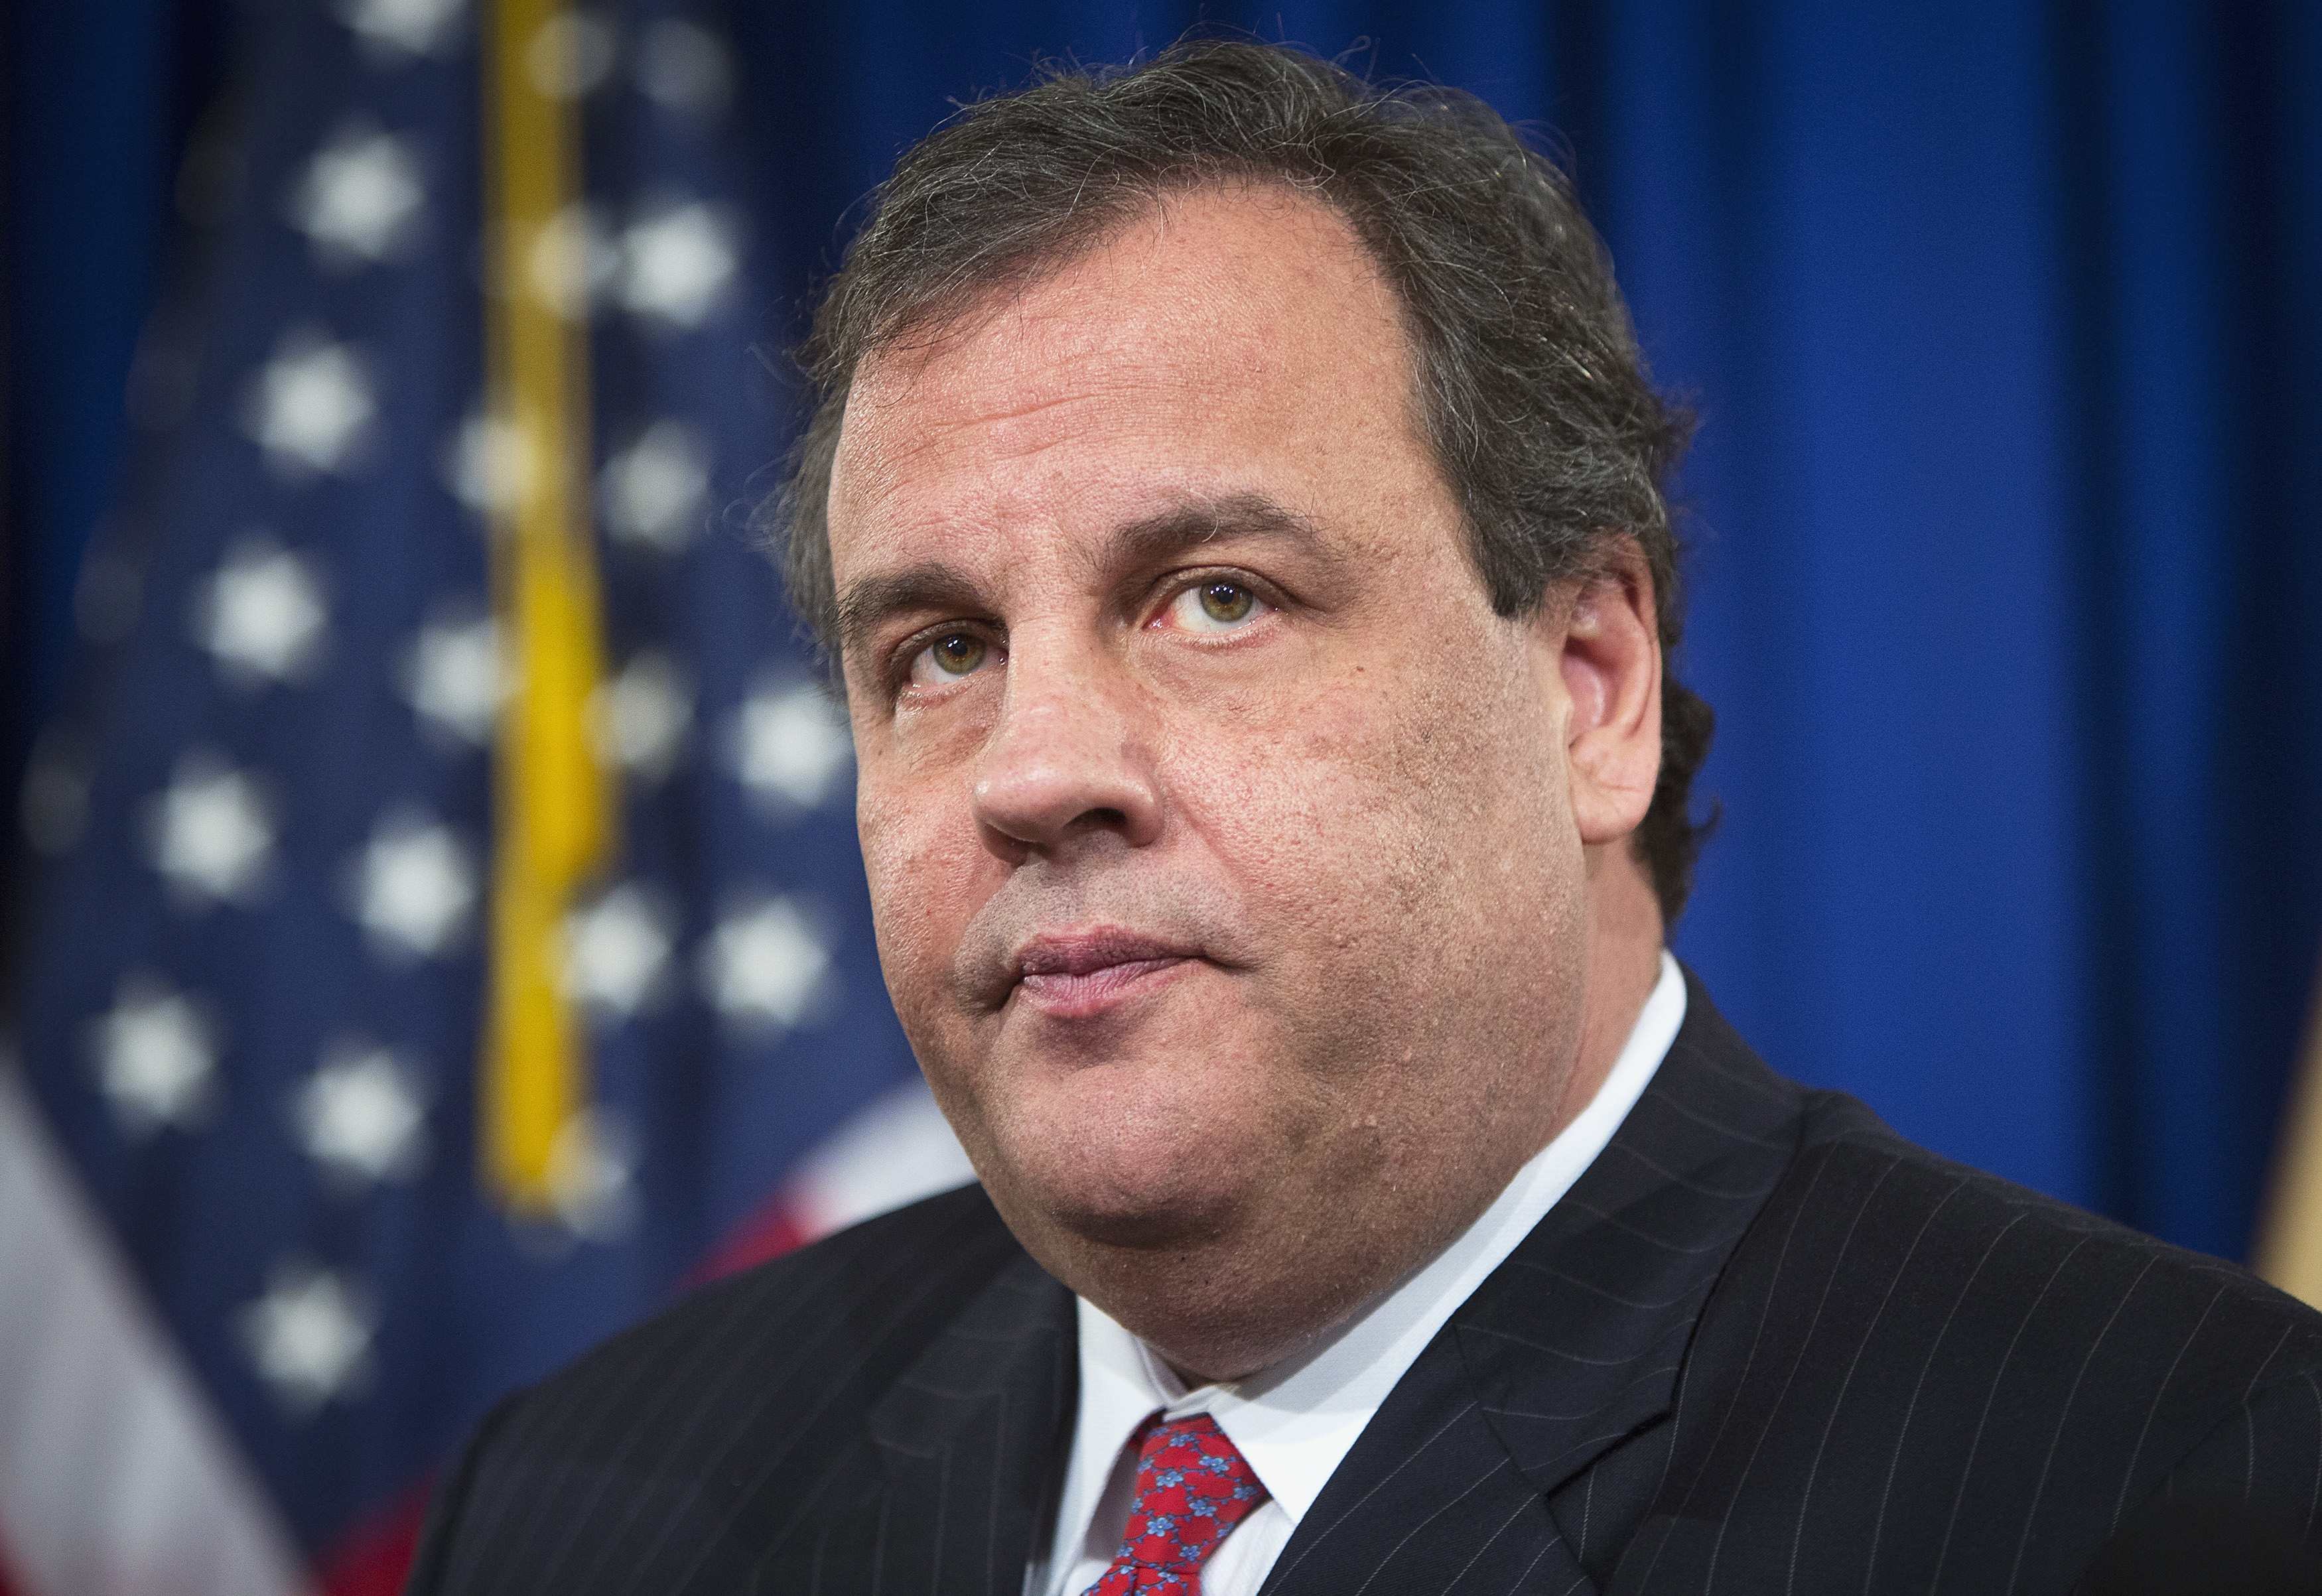 New Jersey Governor Christie gives news conference in Trenton